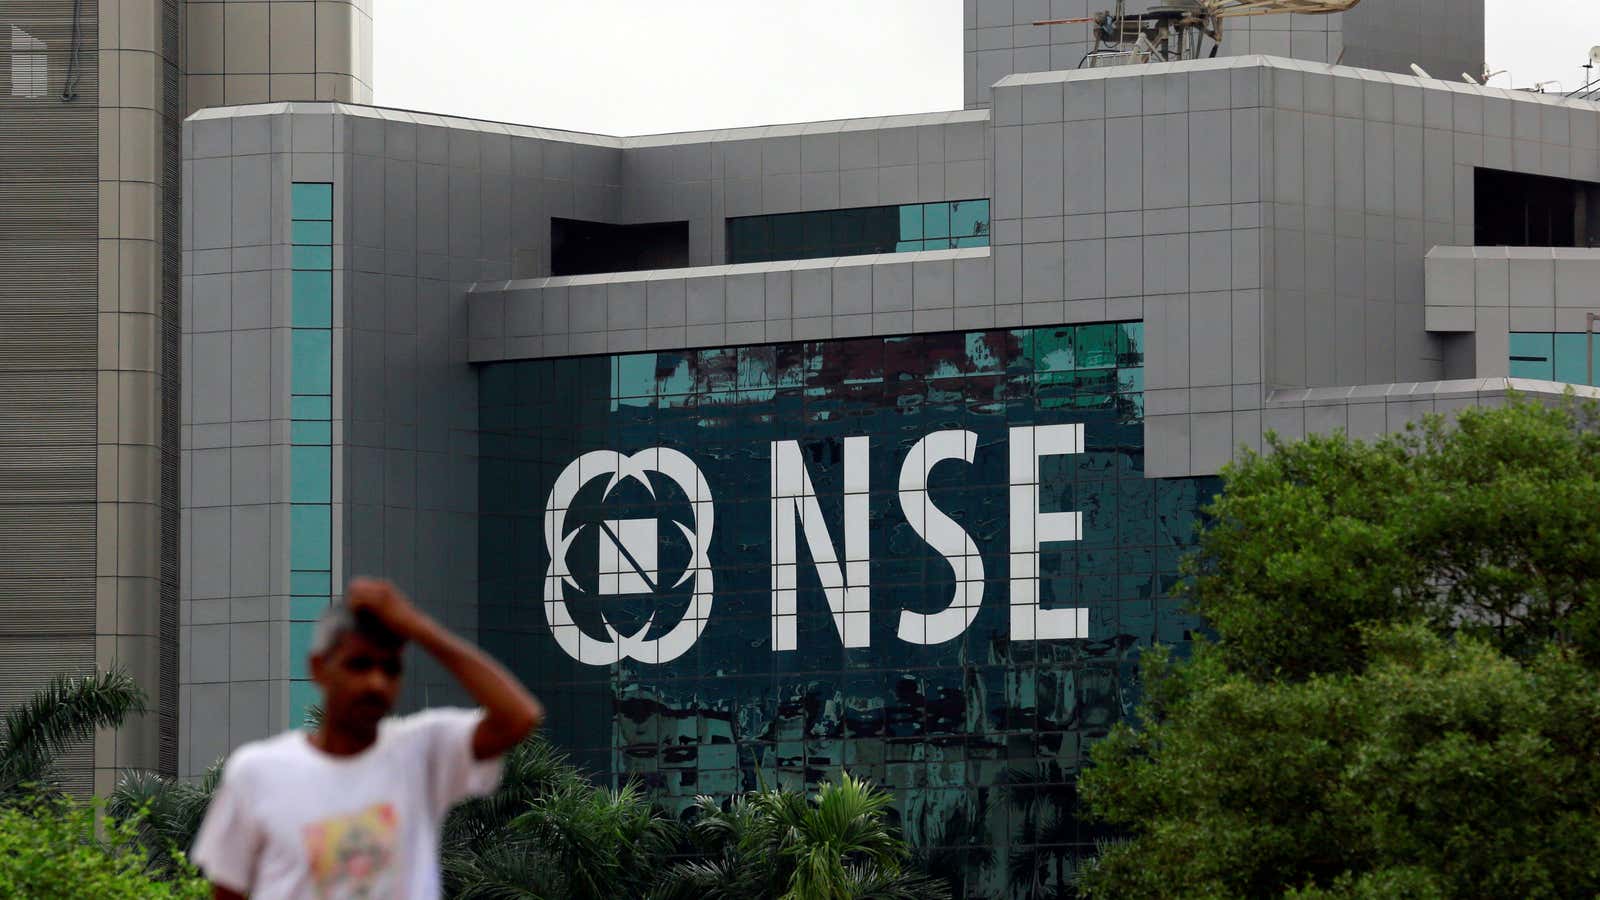 A man walks past the NSE (National Stock Exchange) building in Mumbai, India July 11, 2017. REUTERS/Danish Siddiqui